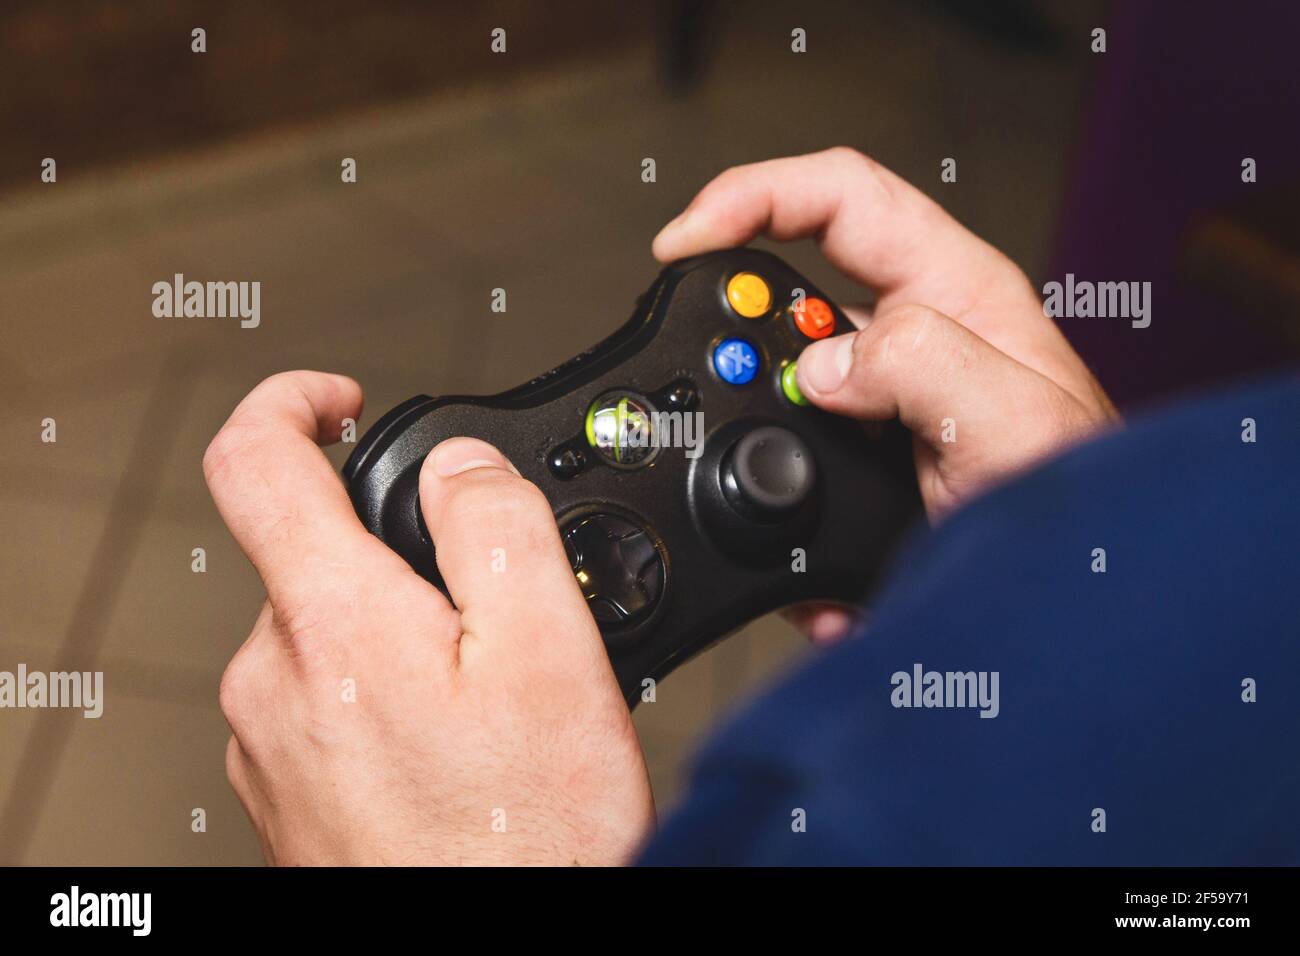 Belarus, Minsk region - August 27, 2017: The guy's hands are holding a joystick xbox and playing a console, close-up. Stock Photo